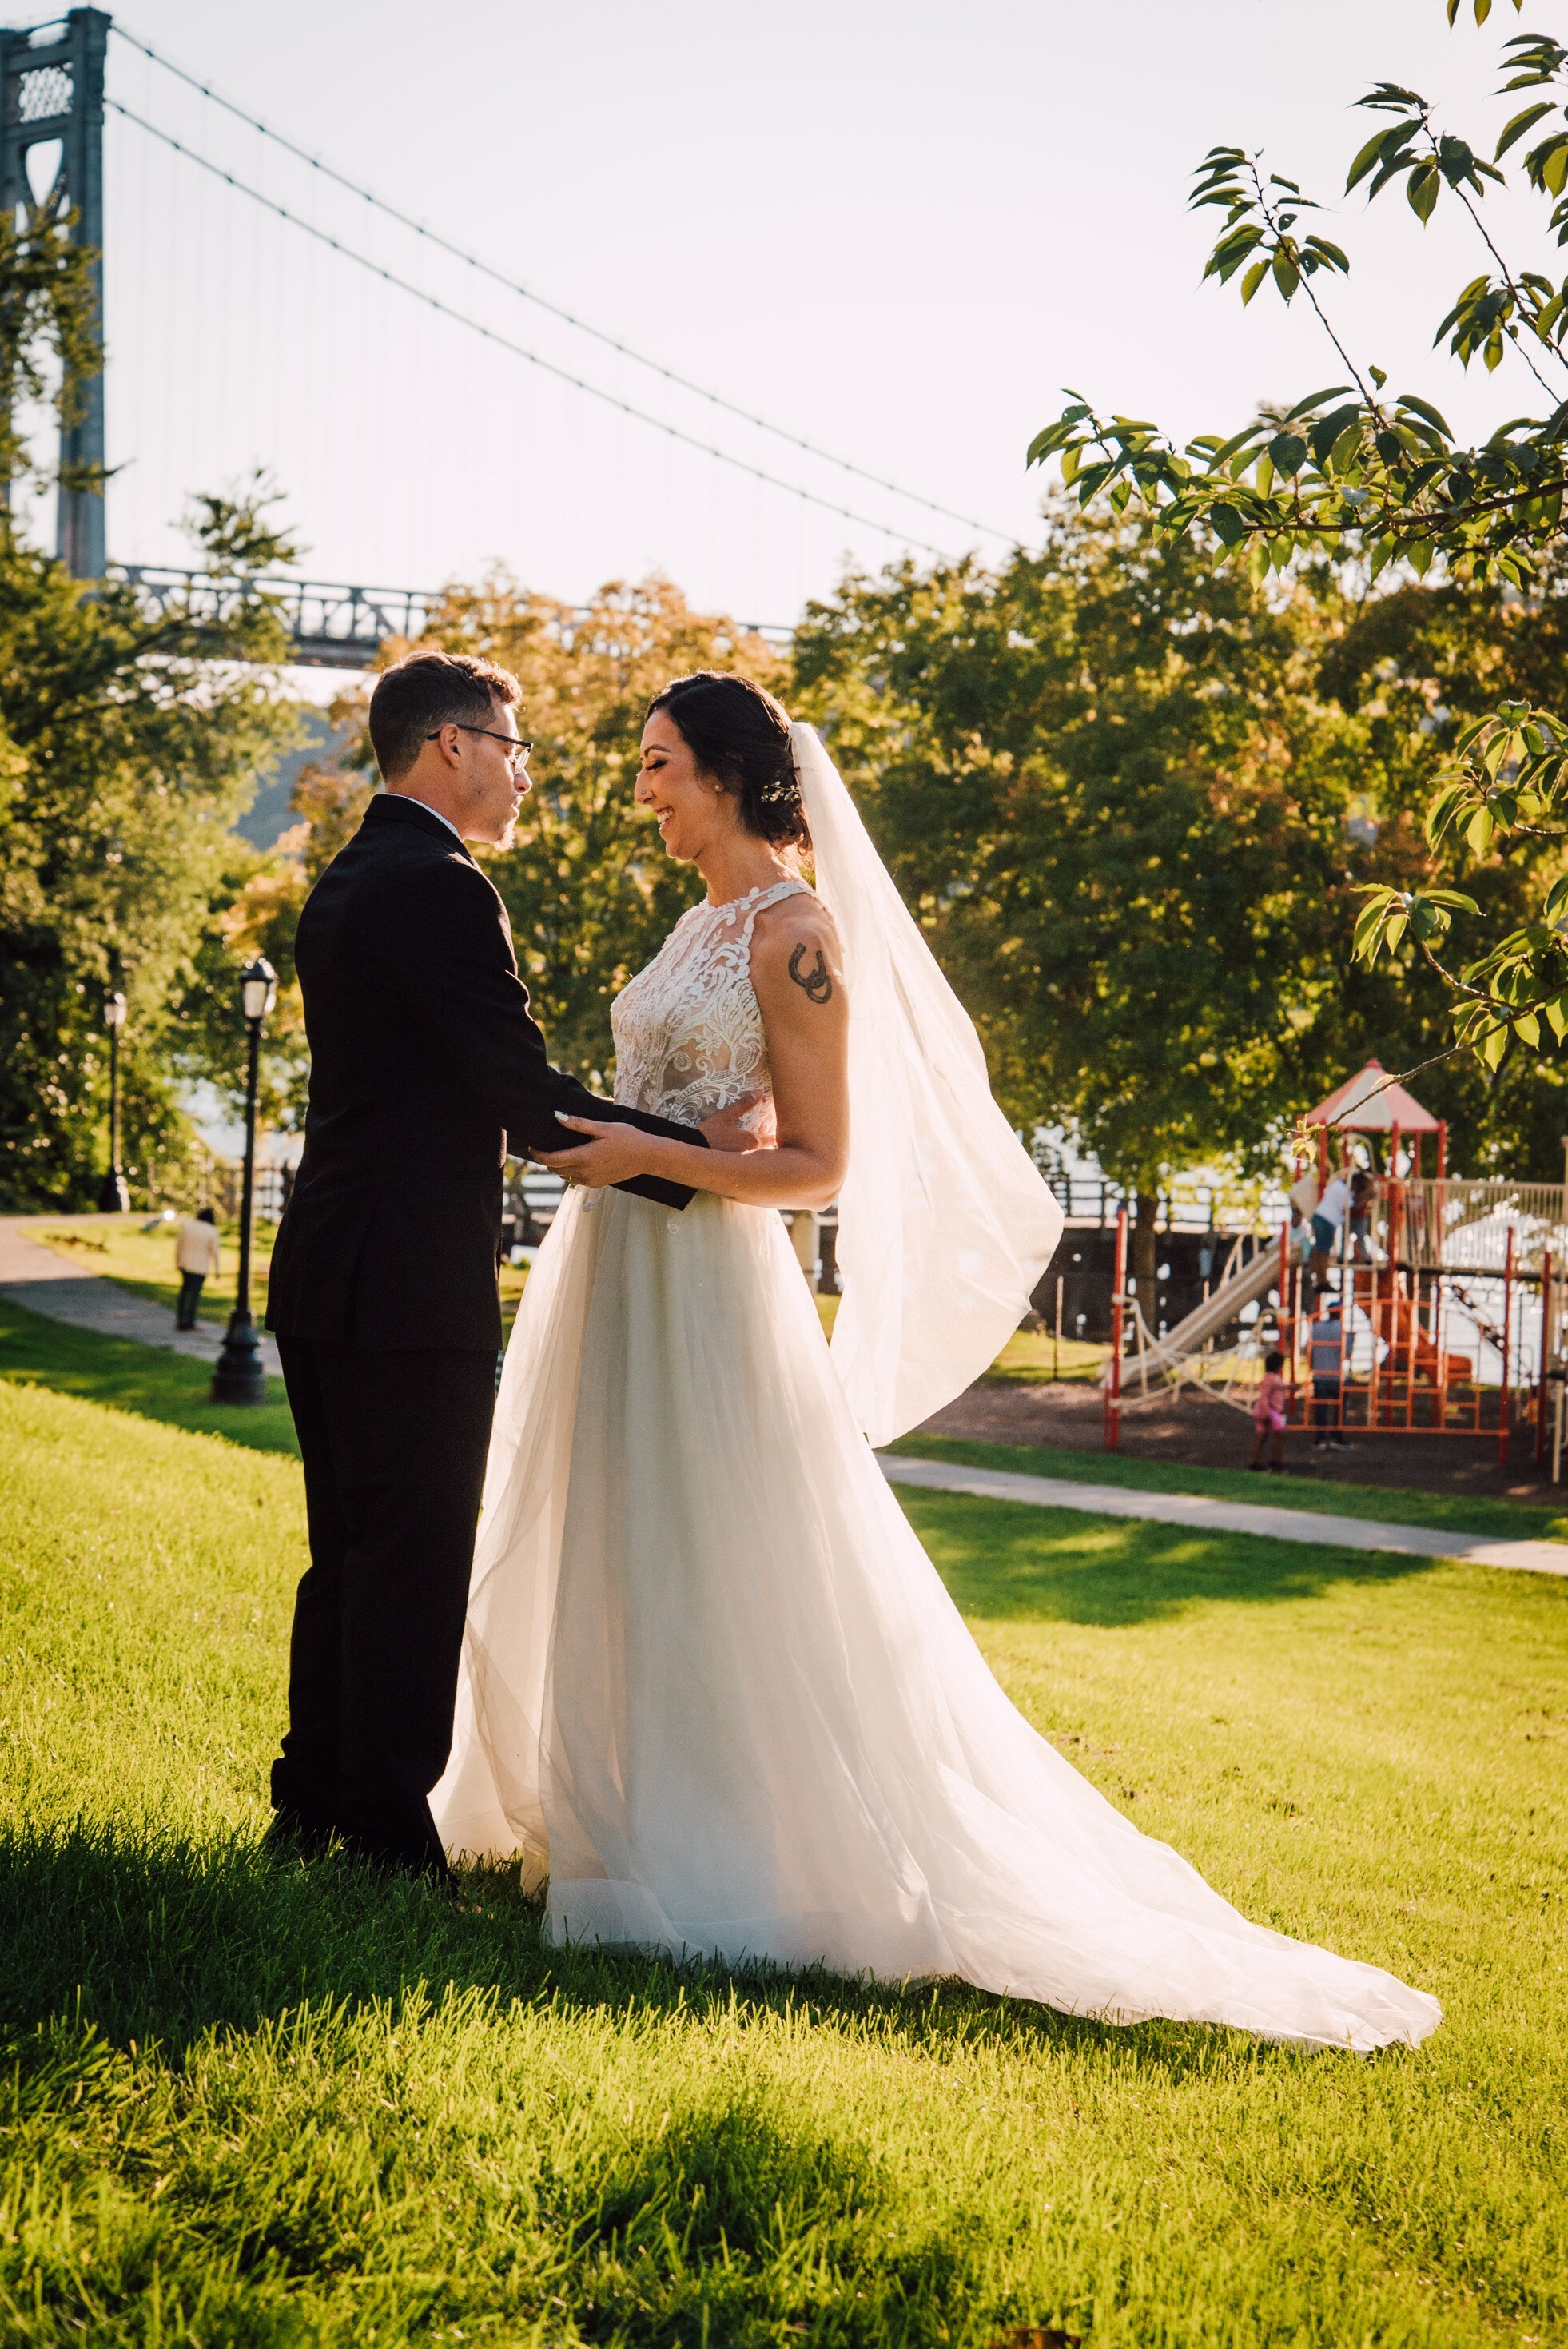  the bride and groom share a smile and embrace at their hudson river wedding first look 